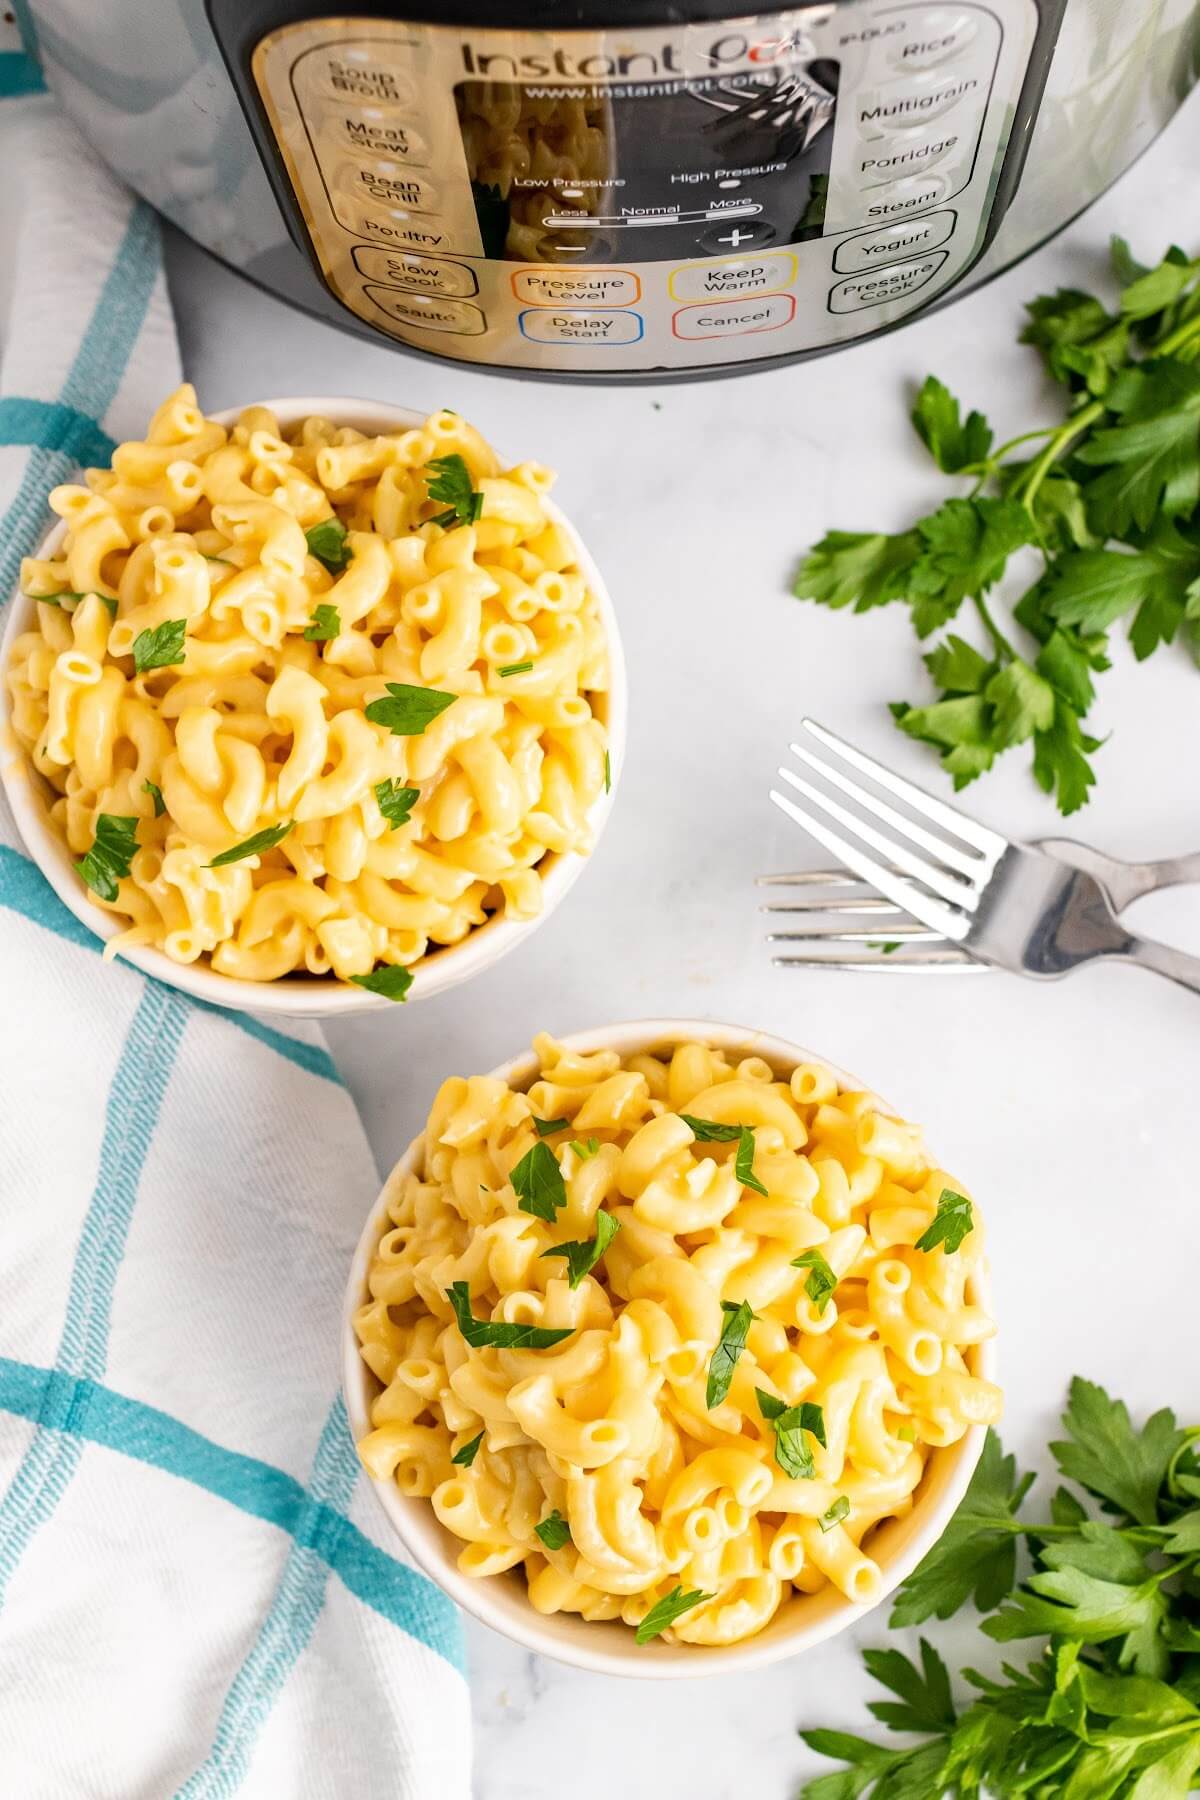 Two bowls full of homemade Mac and cheese, garnished with fresh parsley sitting next to two forks, fresh Italian parsley sprigs, a cloth kitchen towel and an Instant Pot.